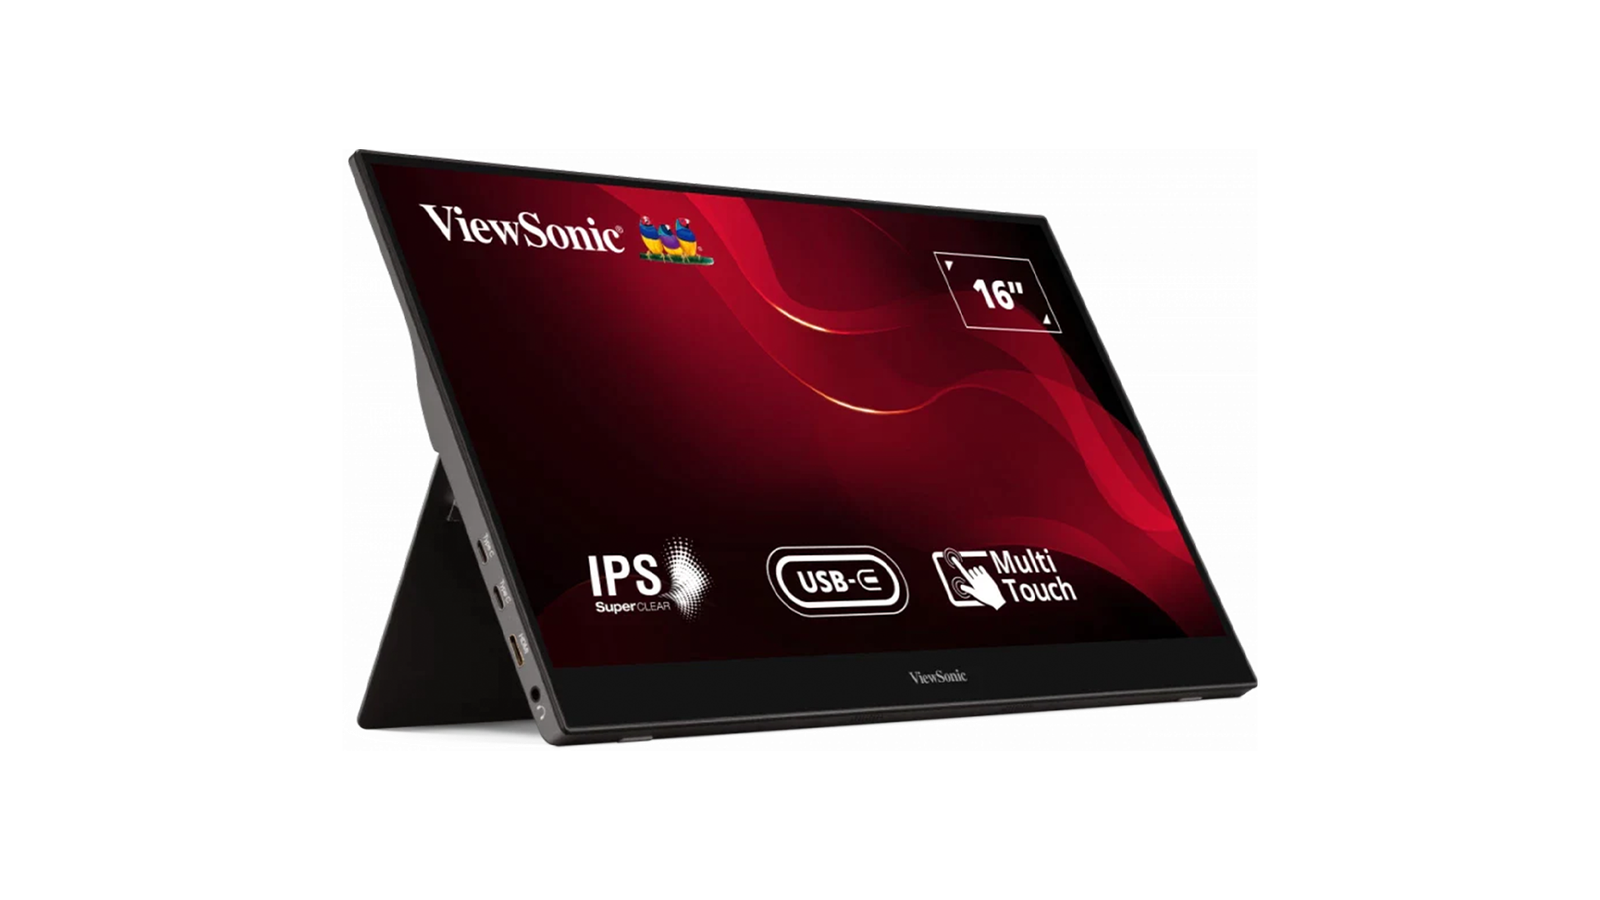 ViewSonic TD1655 - Best portable touchscreen monitor